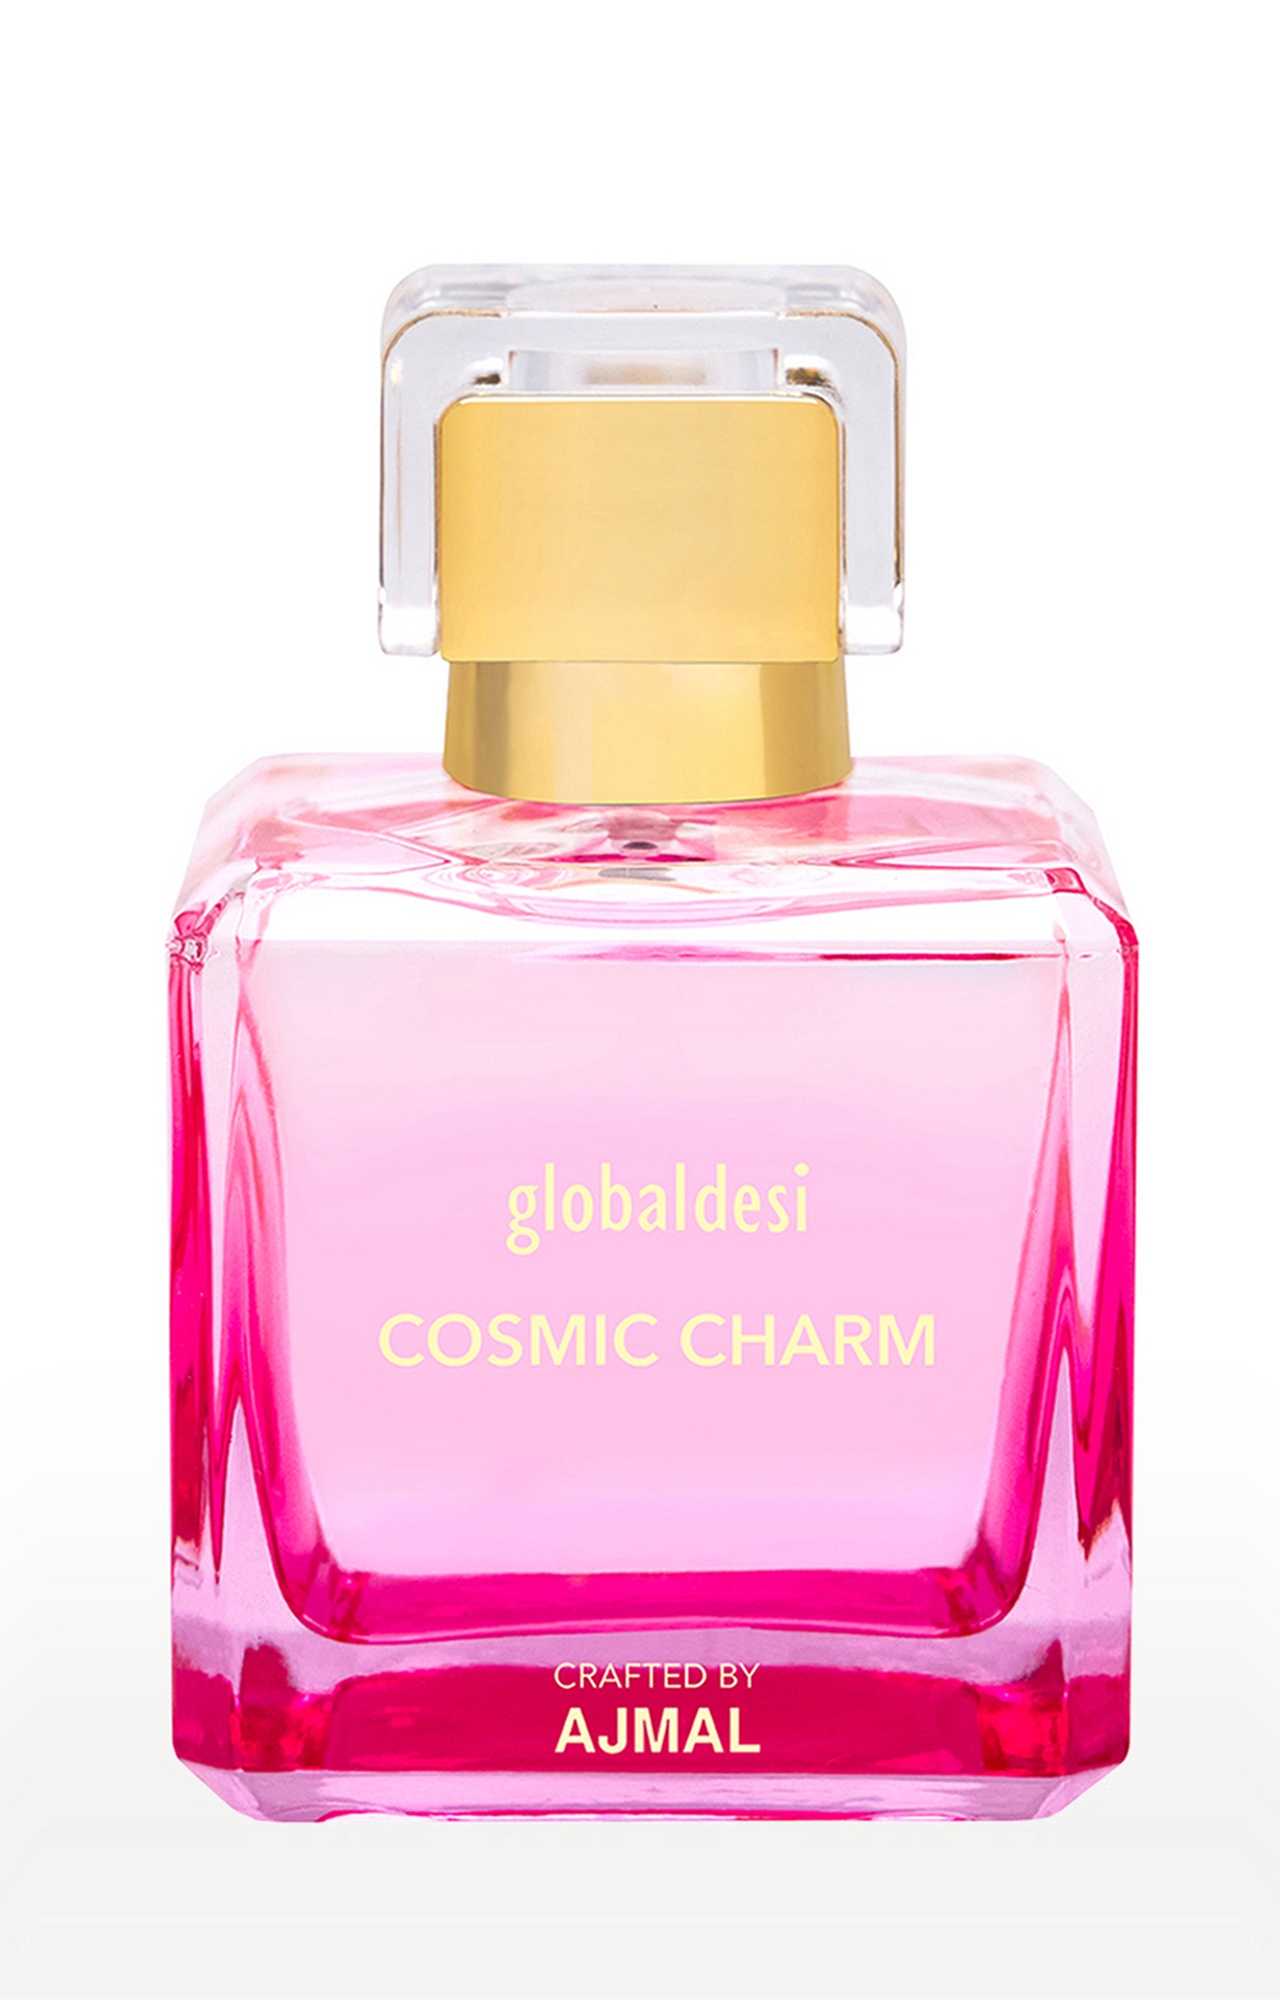 Global Desi Cosmic Charm Eau De Parfum 50ML Long Lasting Scent Spray Gift For Women Crafted By Ajmal